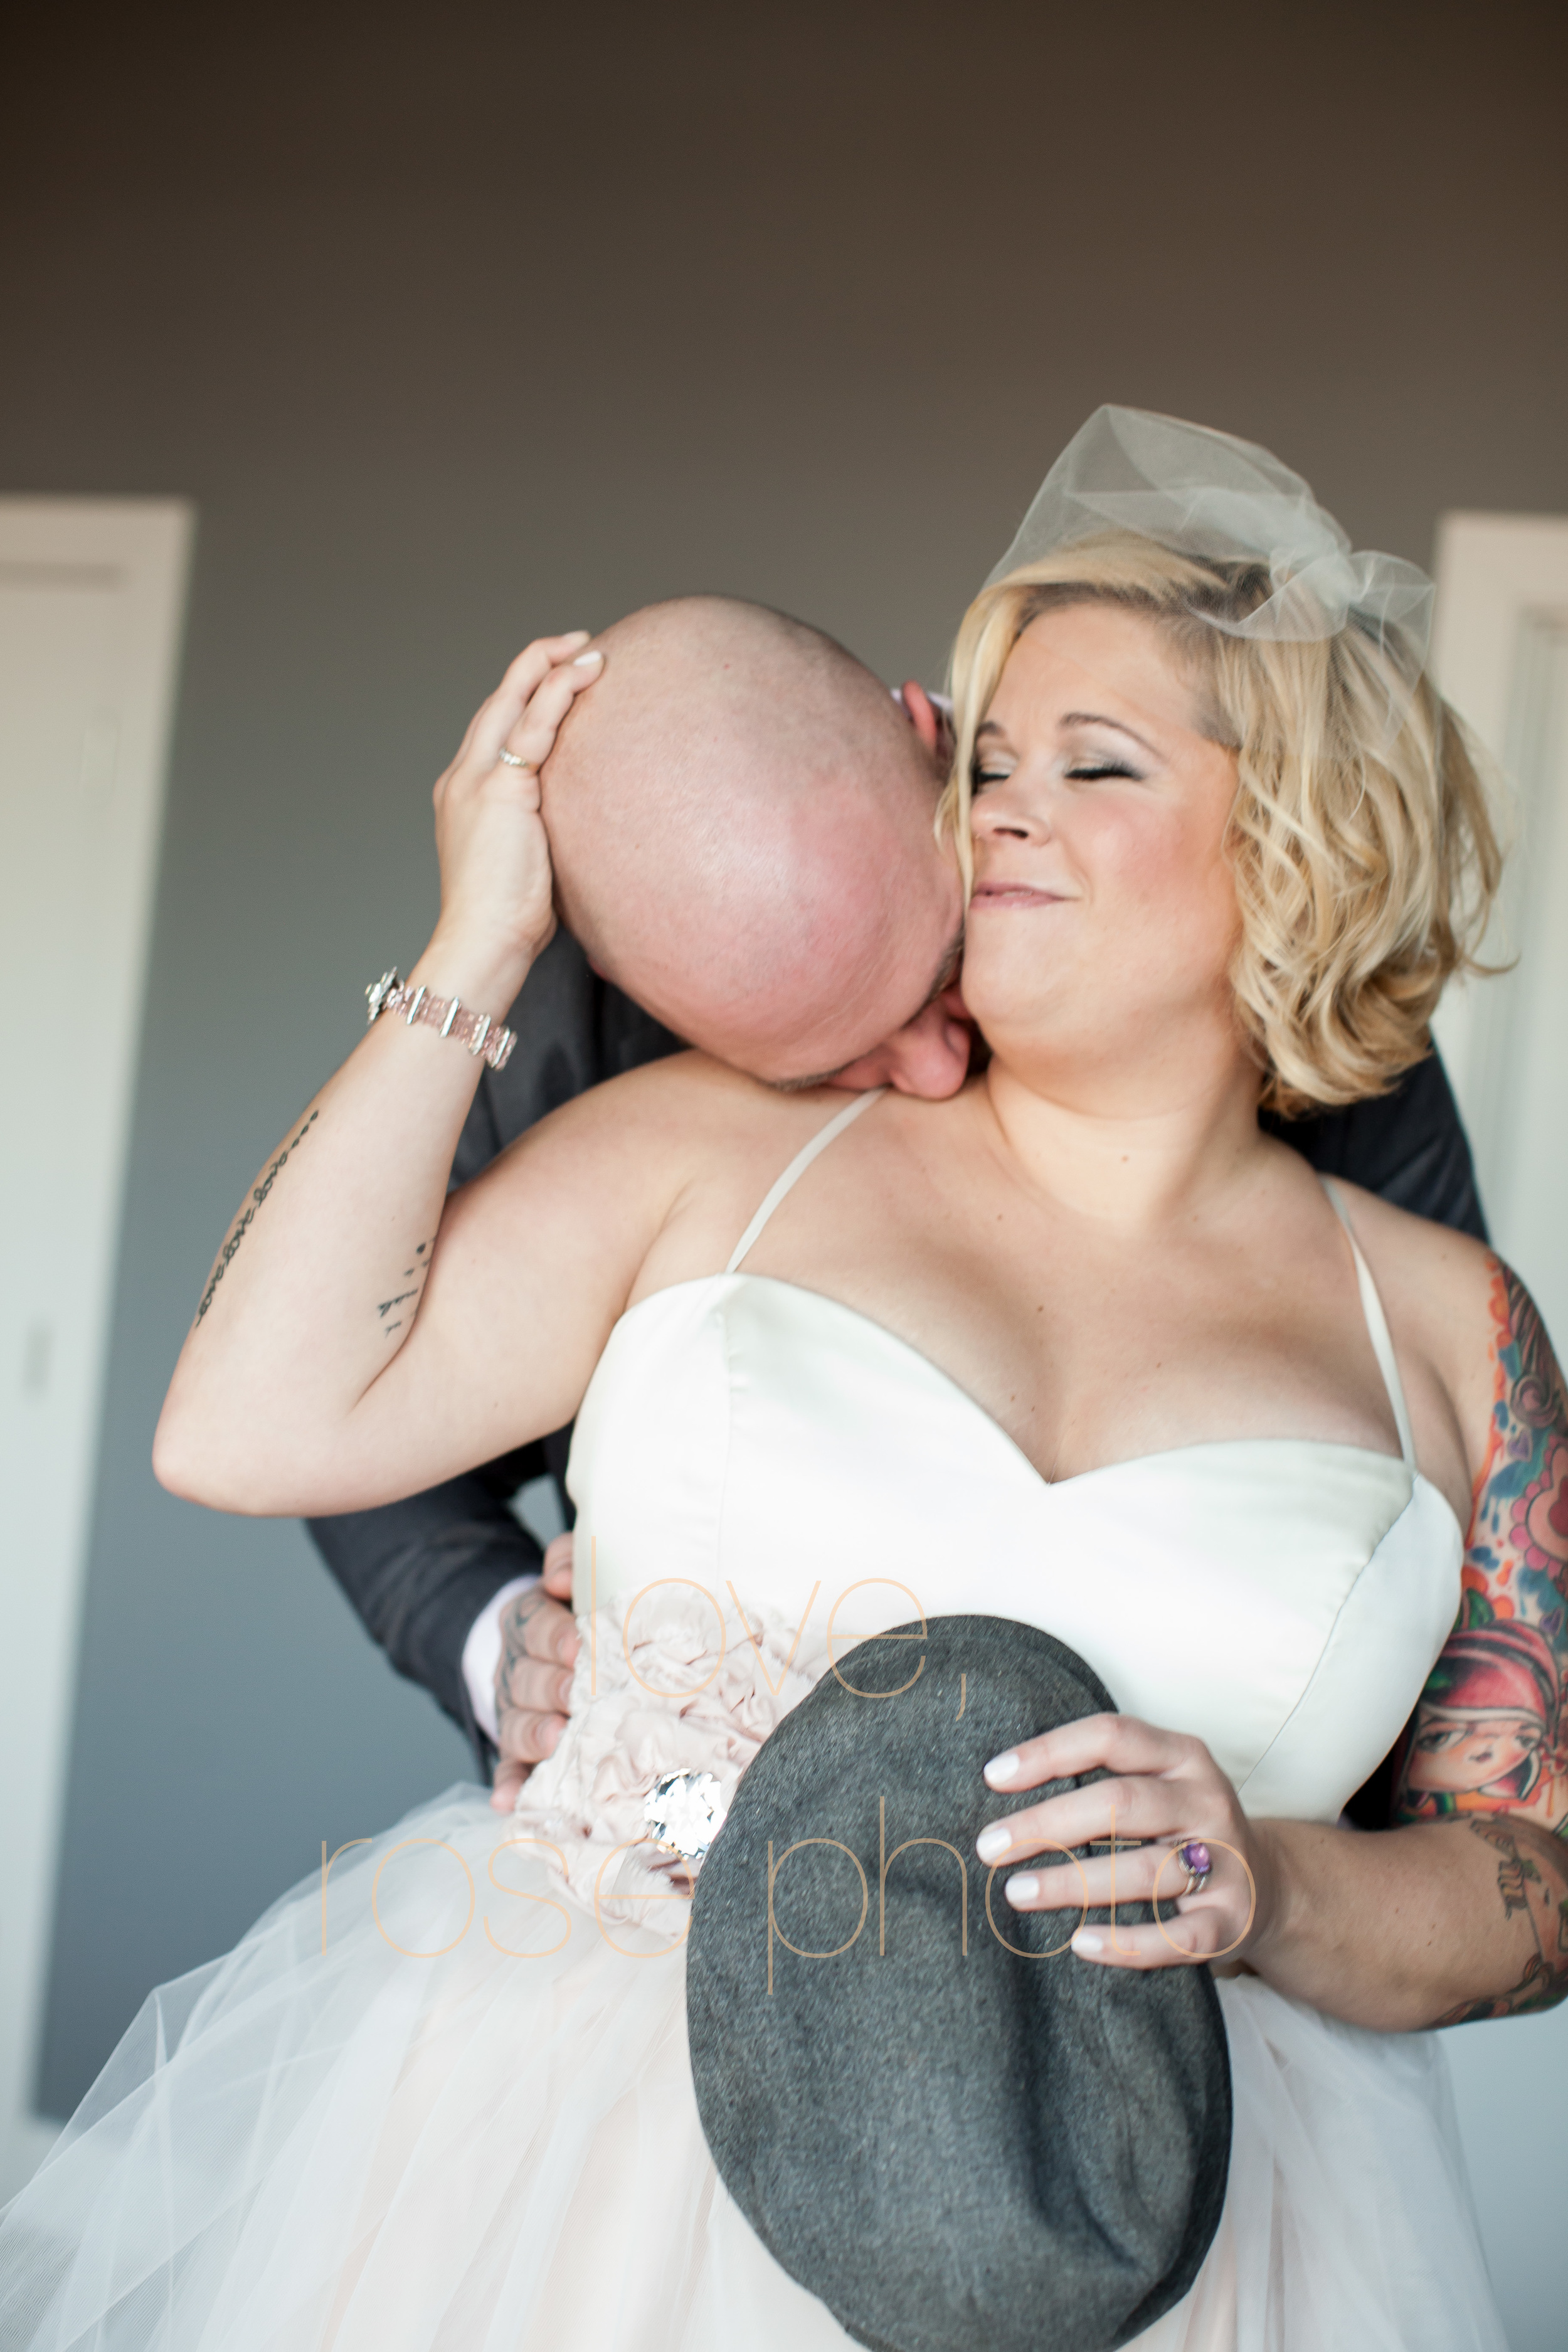 nikki + mike west loop vintage classic throwback pinup rock and roll tattoo photoshoot engagement wedding photo shoot-008.jpg